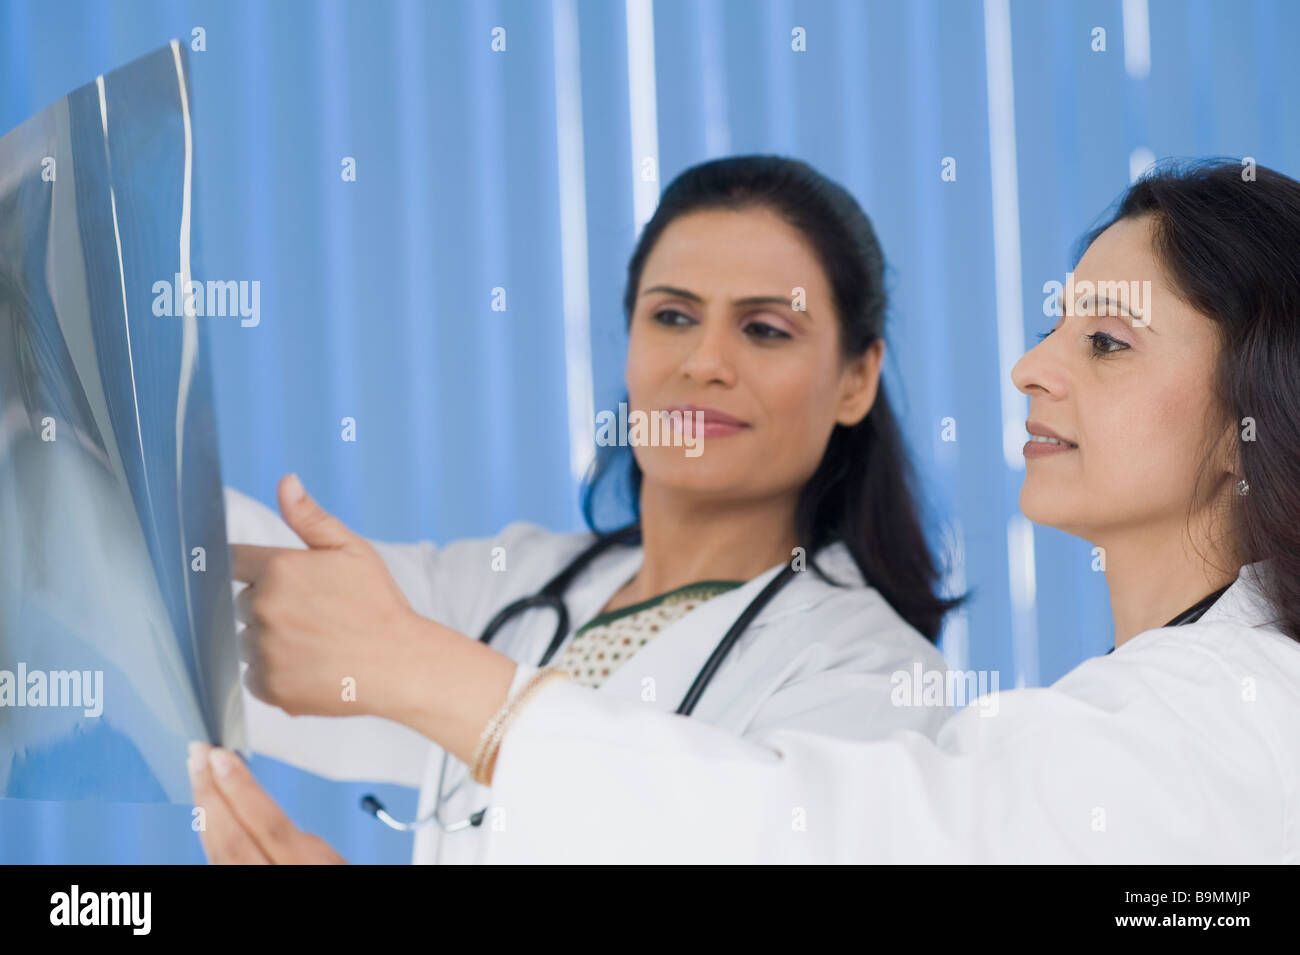 Female doctors examining an x-ray report Stock Photo